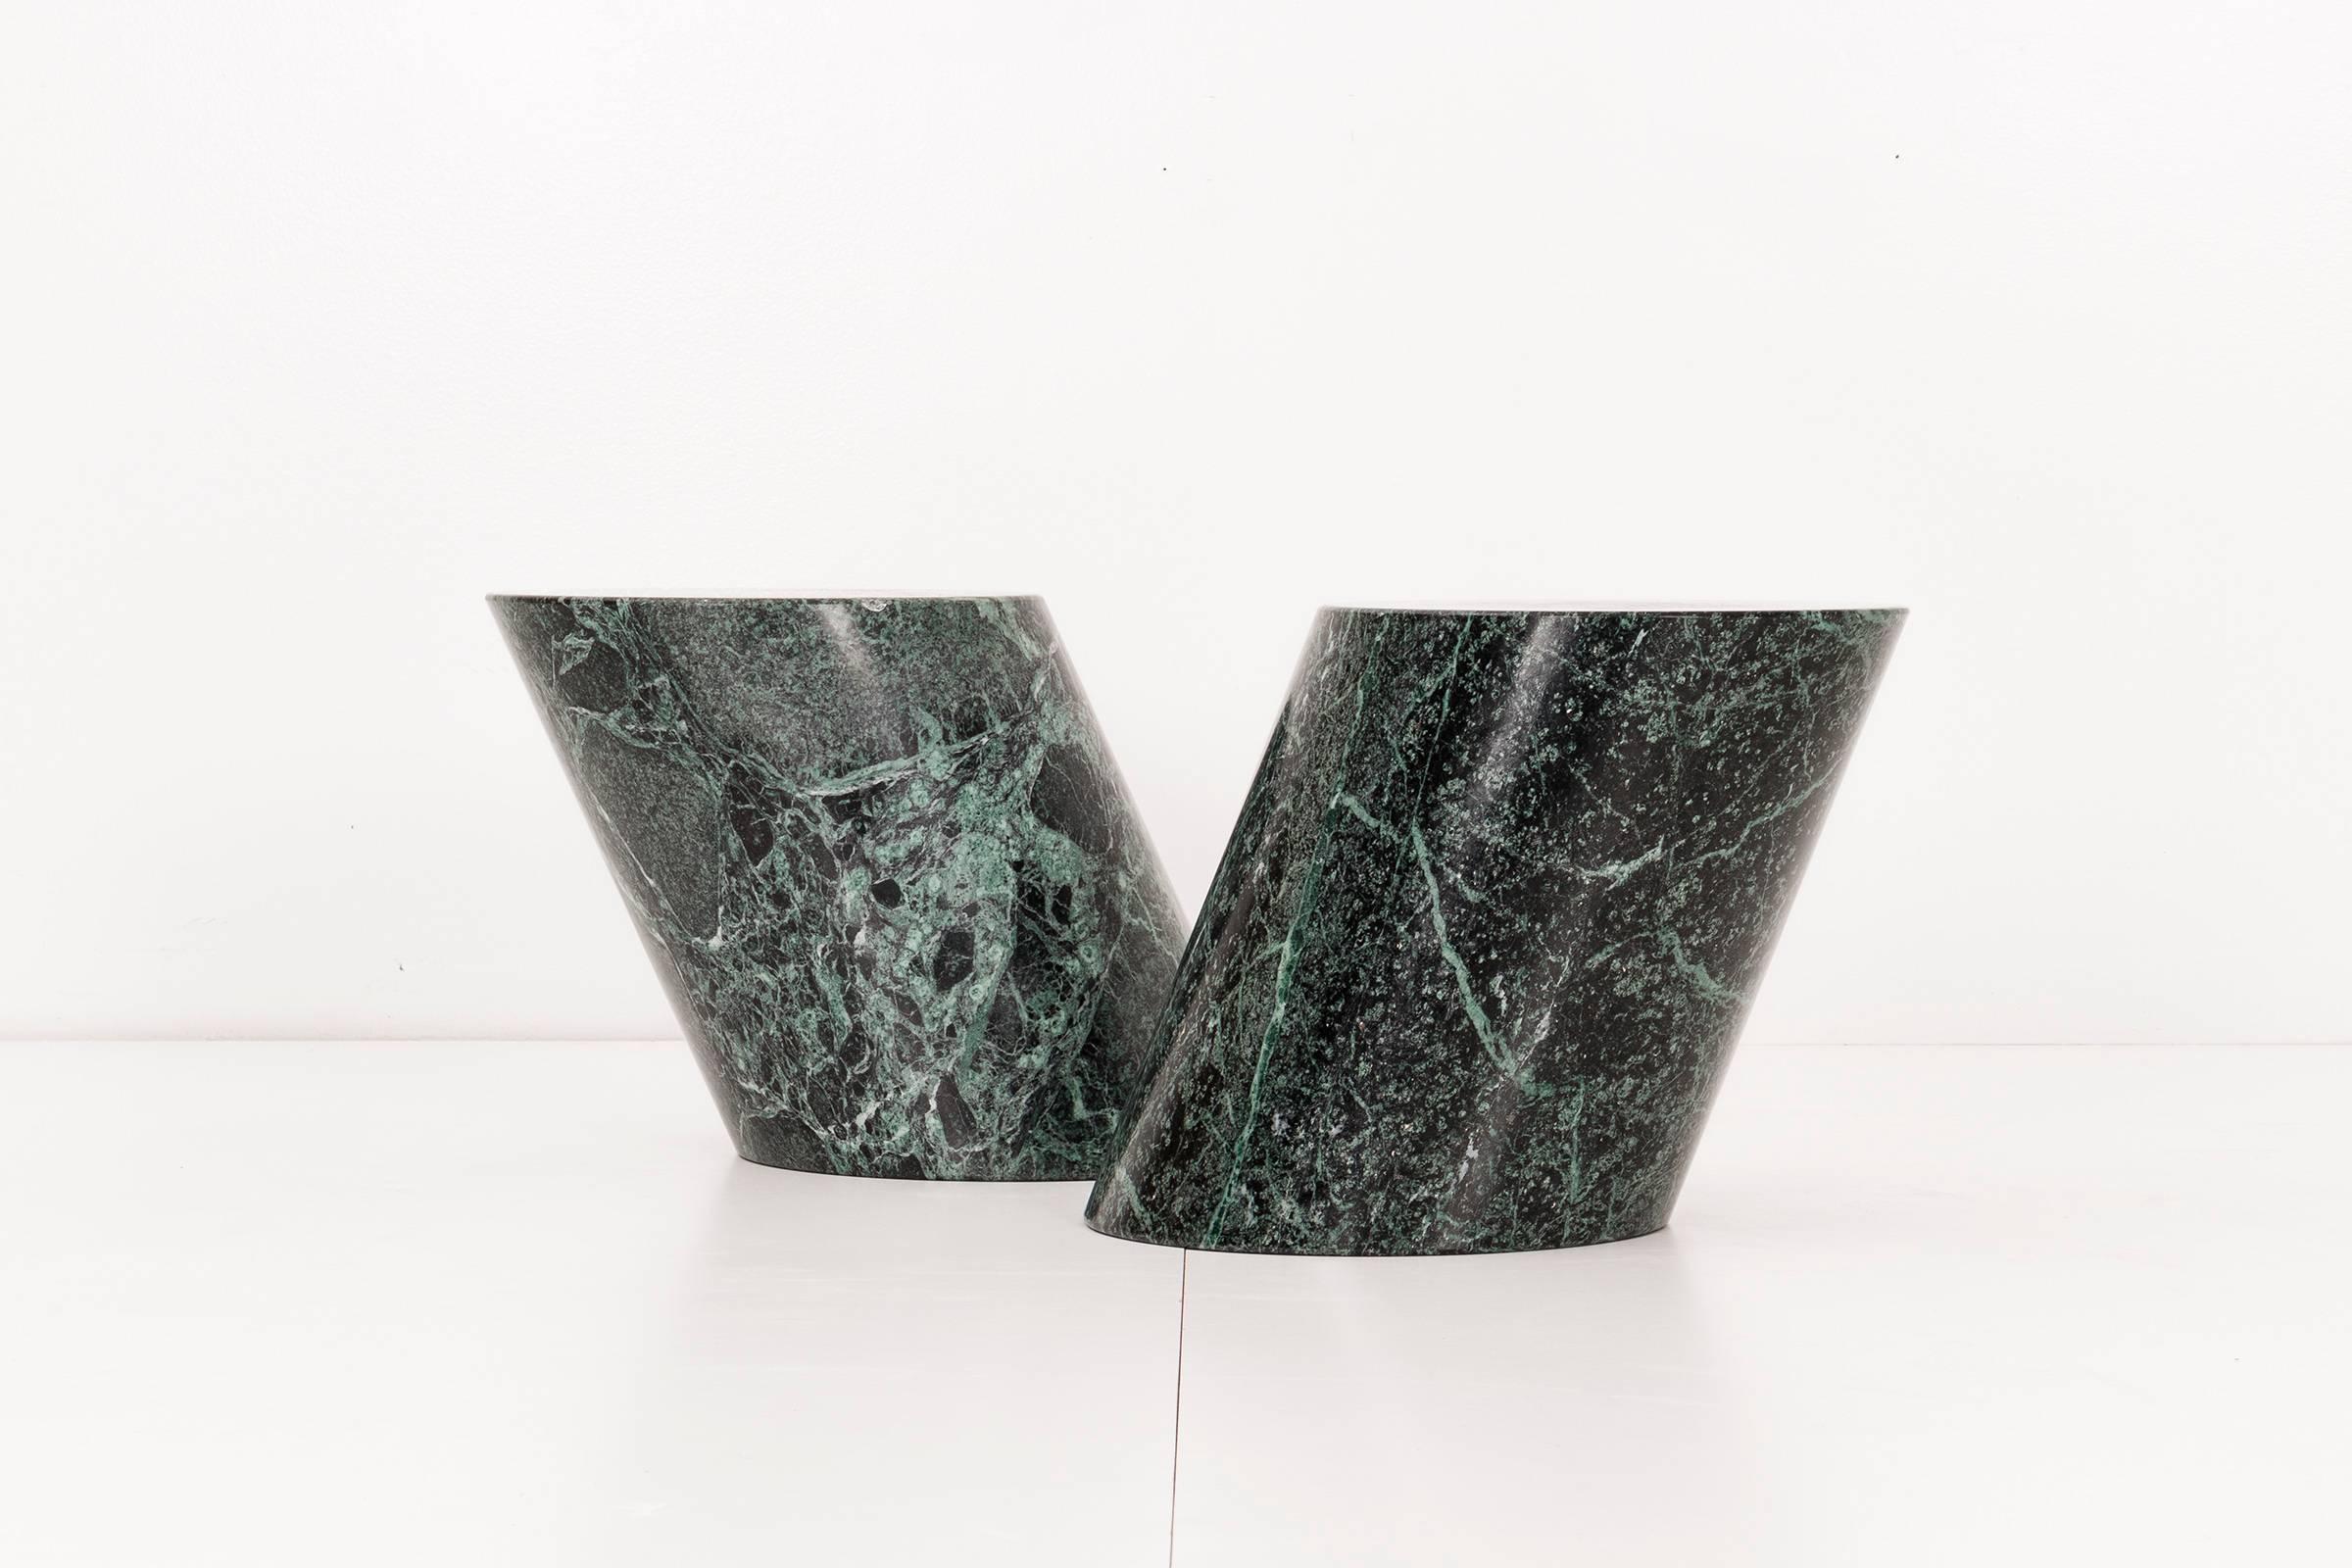 Solid Verde Alpi marble stump tables.  Dimensions posted below are of table surface.  The table as a whole has a depth of 21"